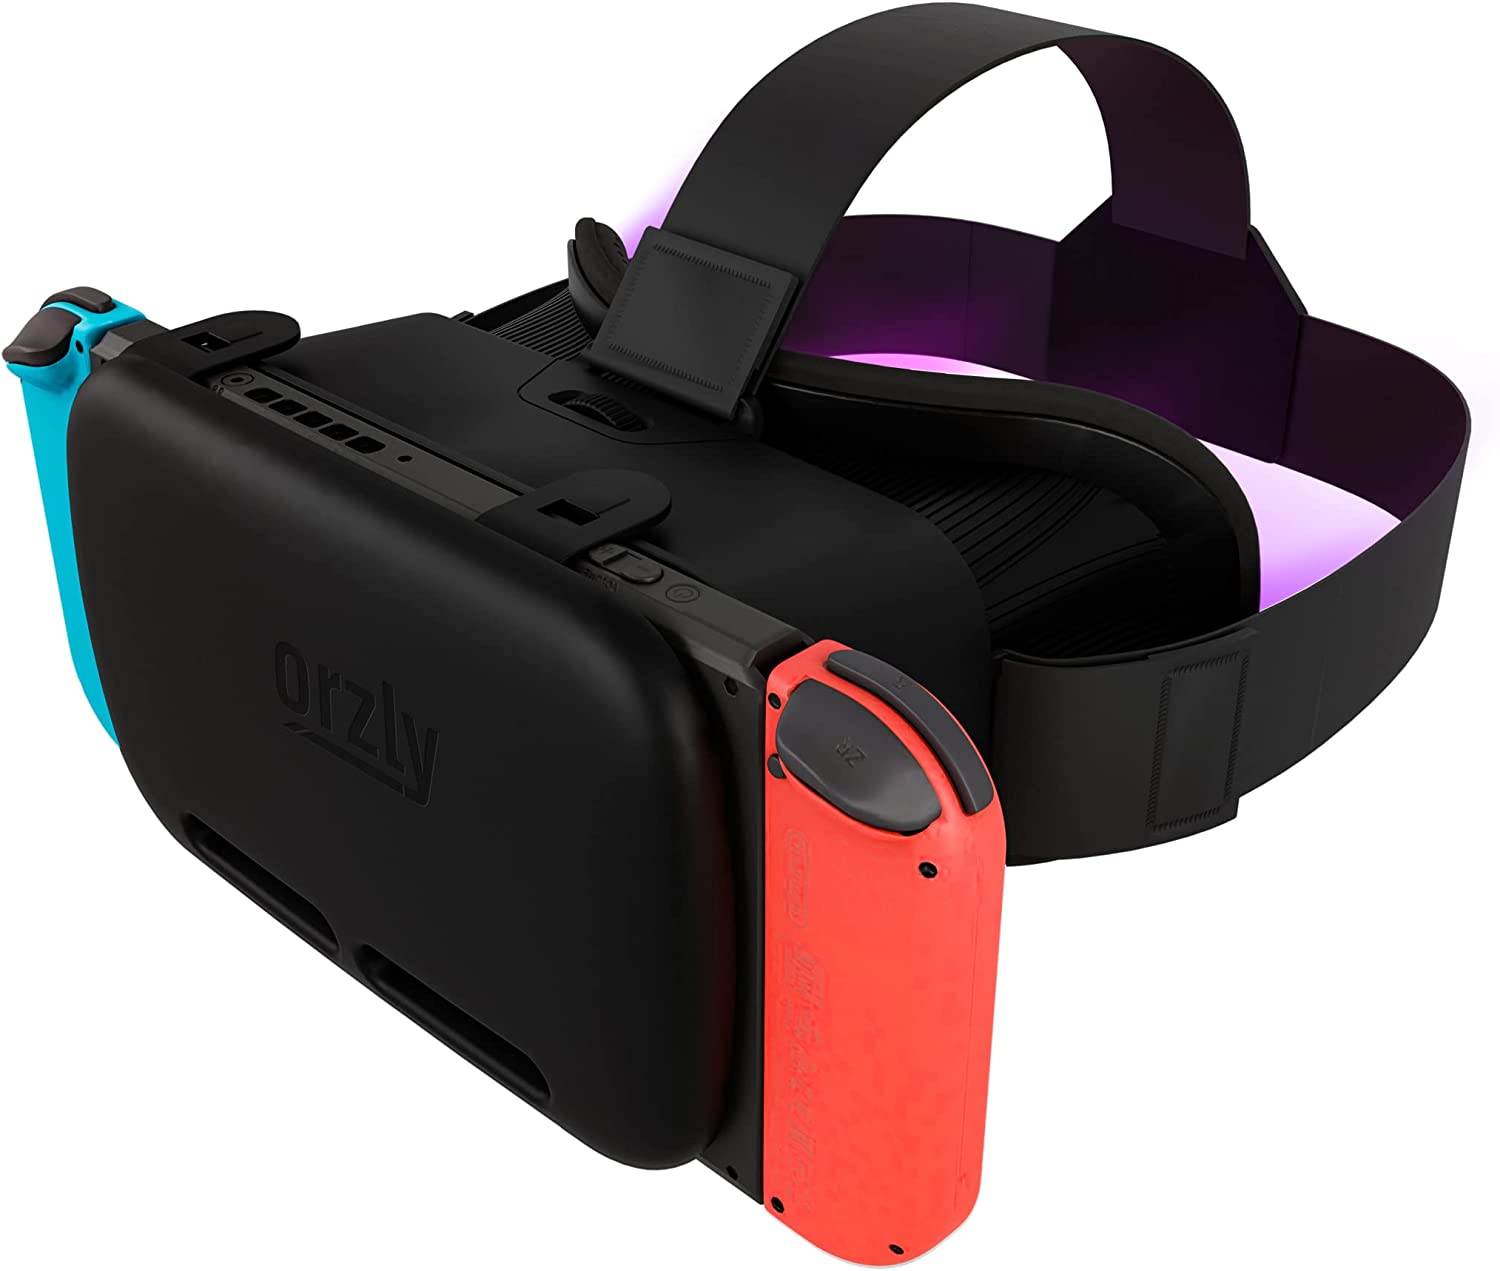 Orzly VR Headset for Nintendo Switch.